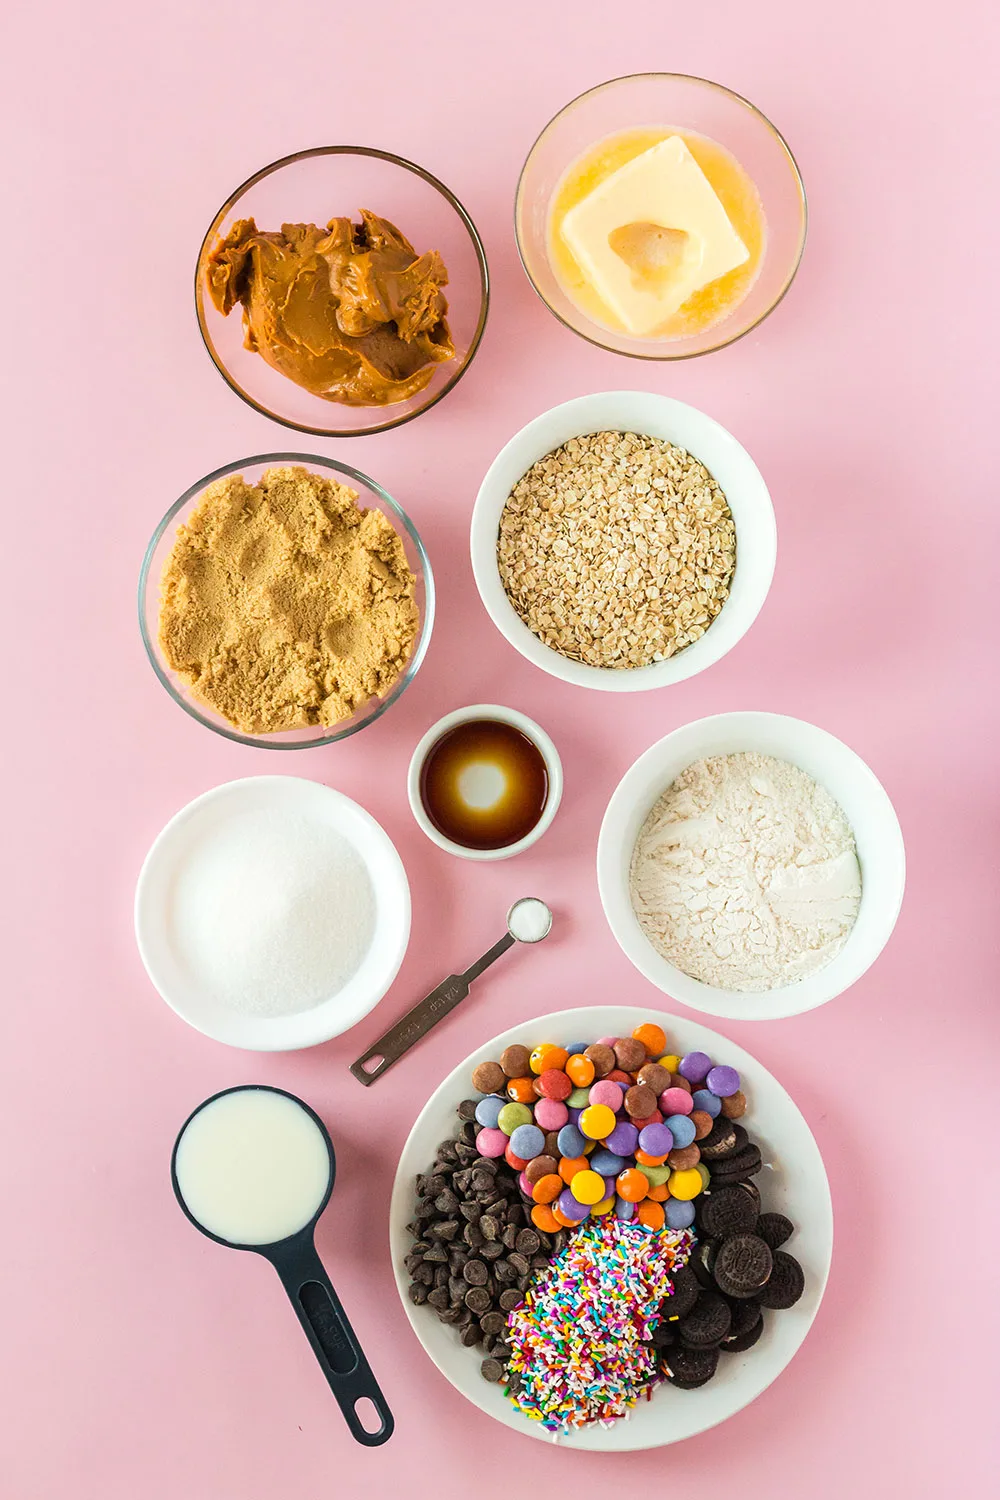 Butter, sugar, oats, and other ingredients in bowls on pink table. 